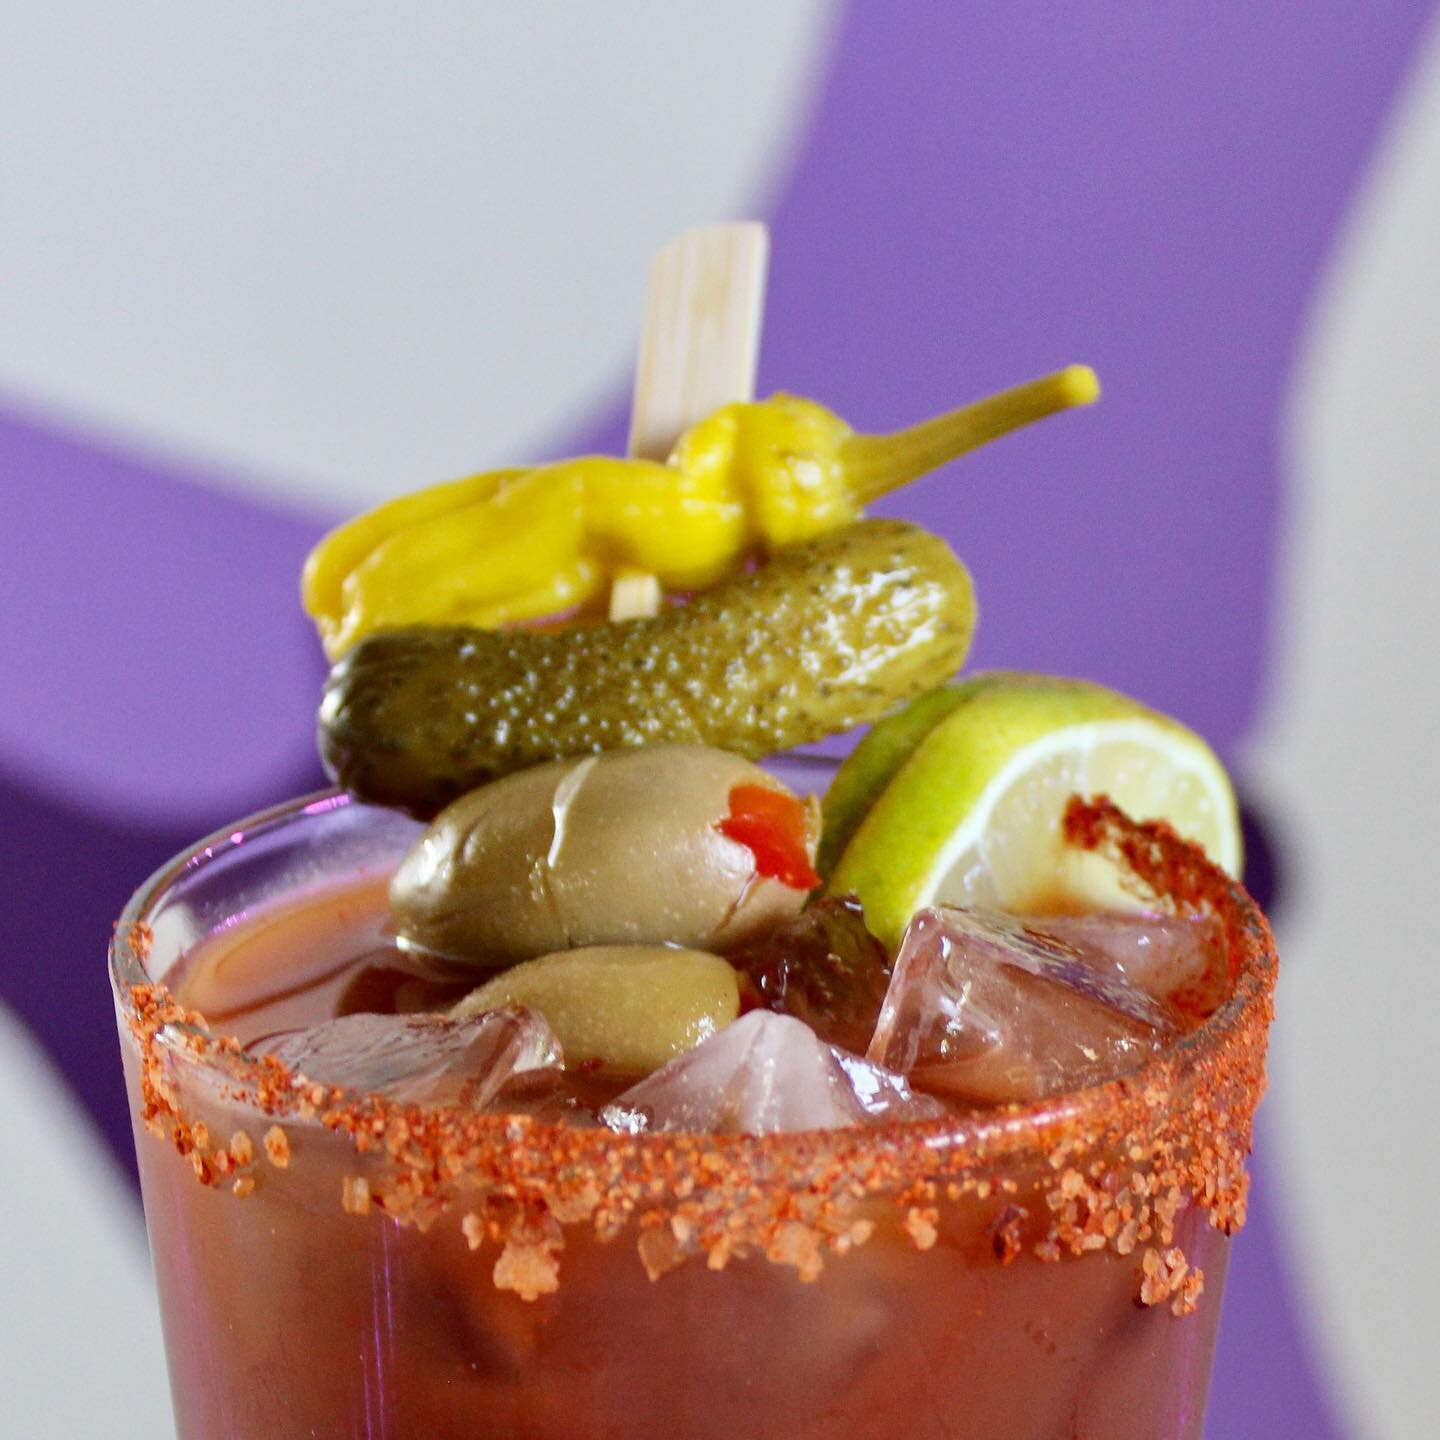 Up close and personal with our Krazy Mary 😚 Have you tried K-Tea yet? It&rsquo;s quite the buzz without the booze. 🙌🏼

#kavanights #bloodymary #mocktails #spicydrinks #spicybloody #ktea #inlandbotanicals #buzzwithoutthebooze